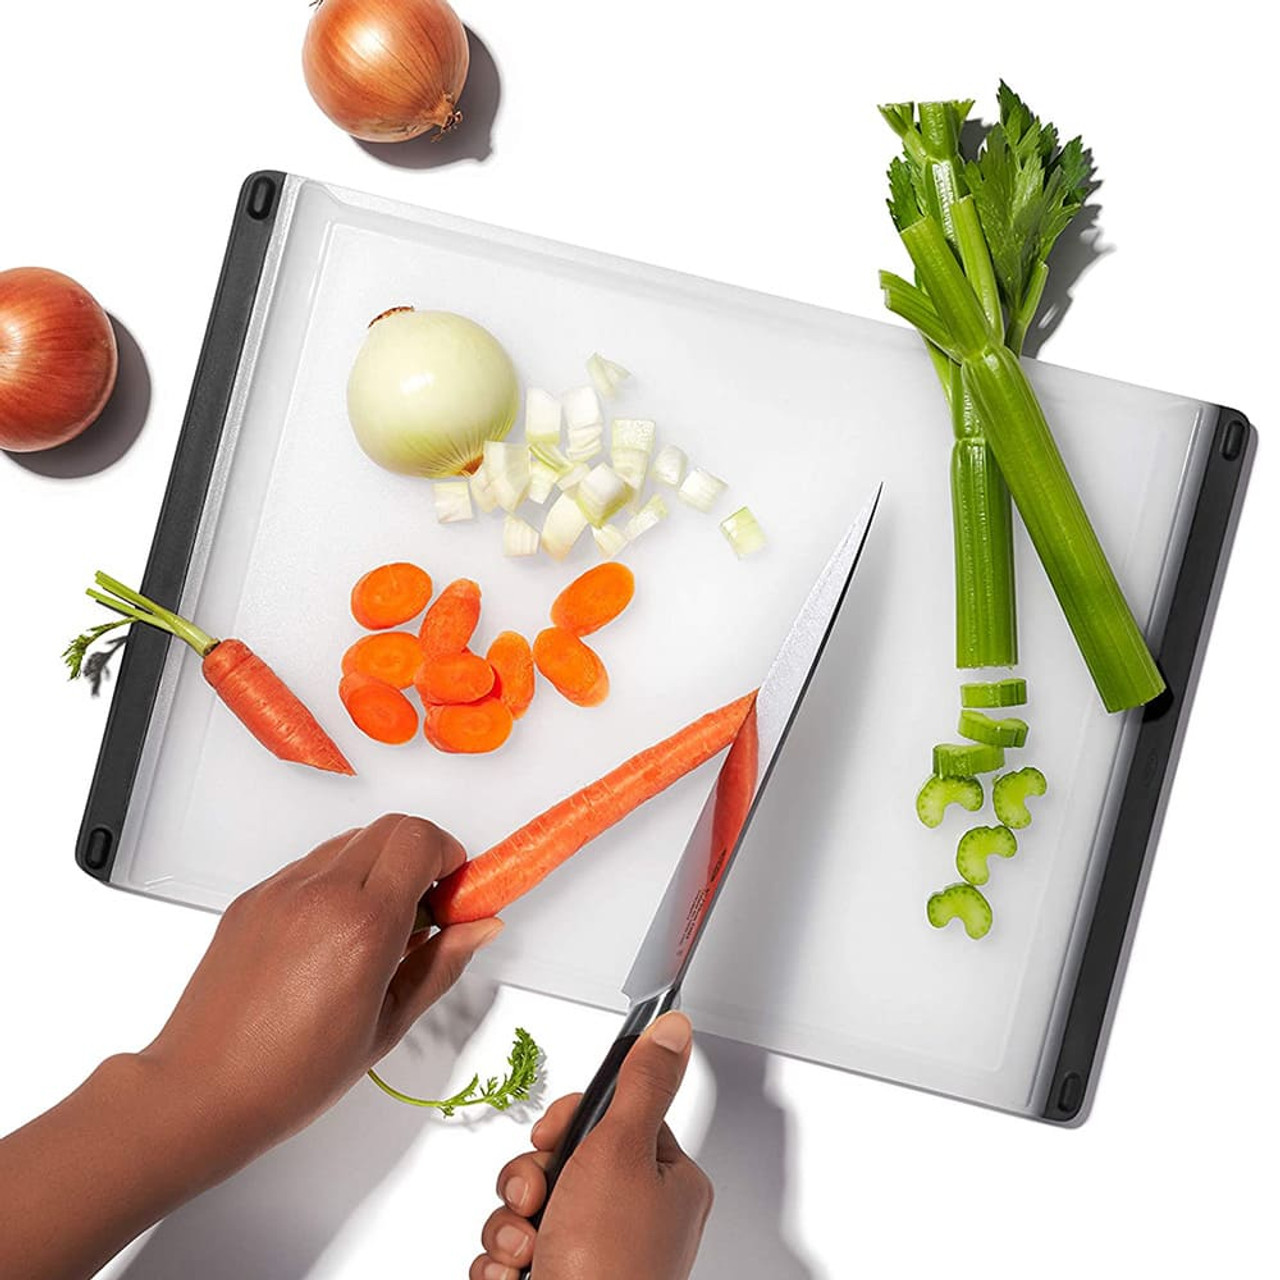 OXO GG 3 PC EVERYDAY CUTTING BOARD SET & Reviews